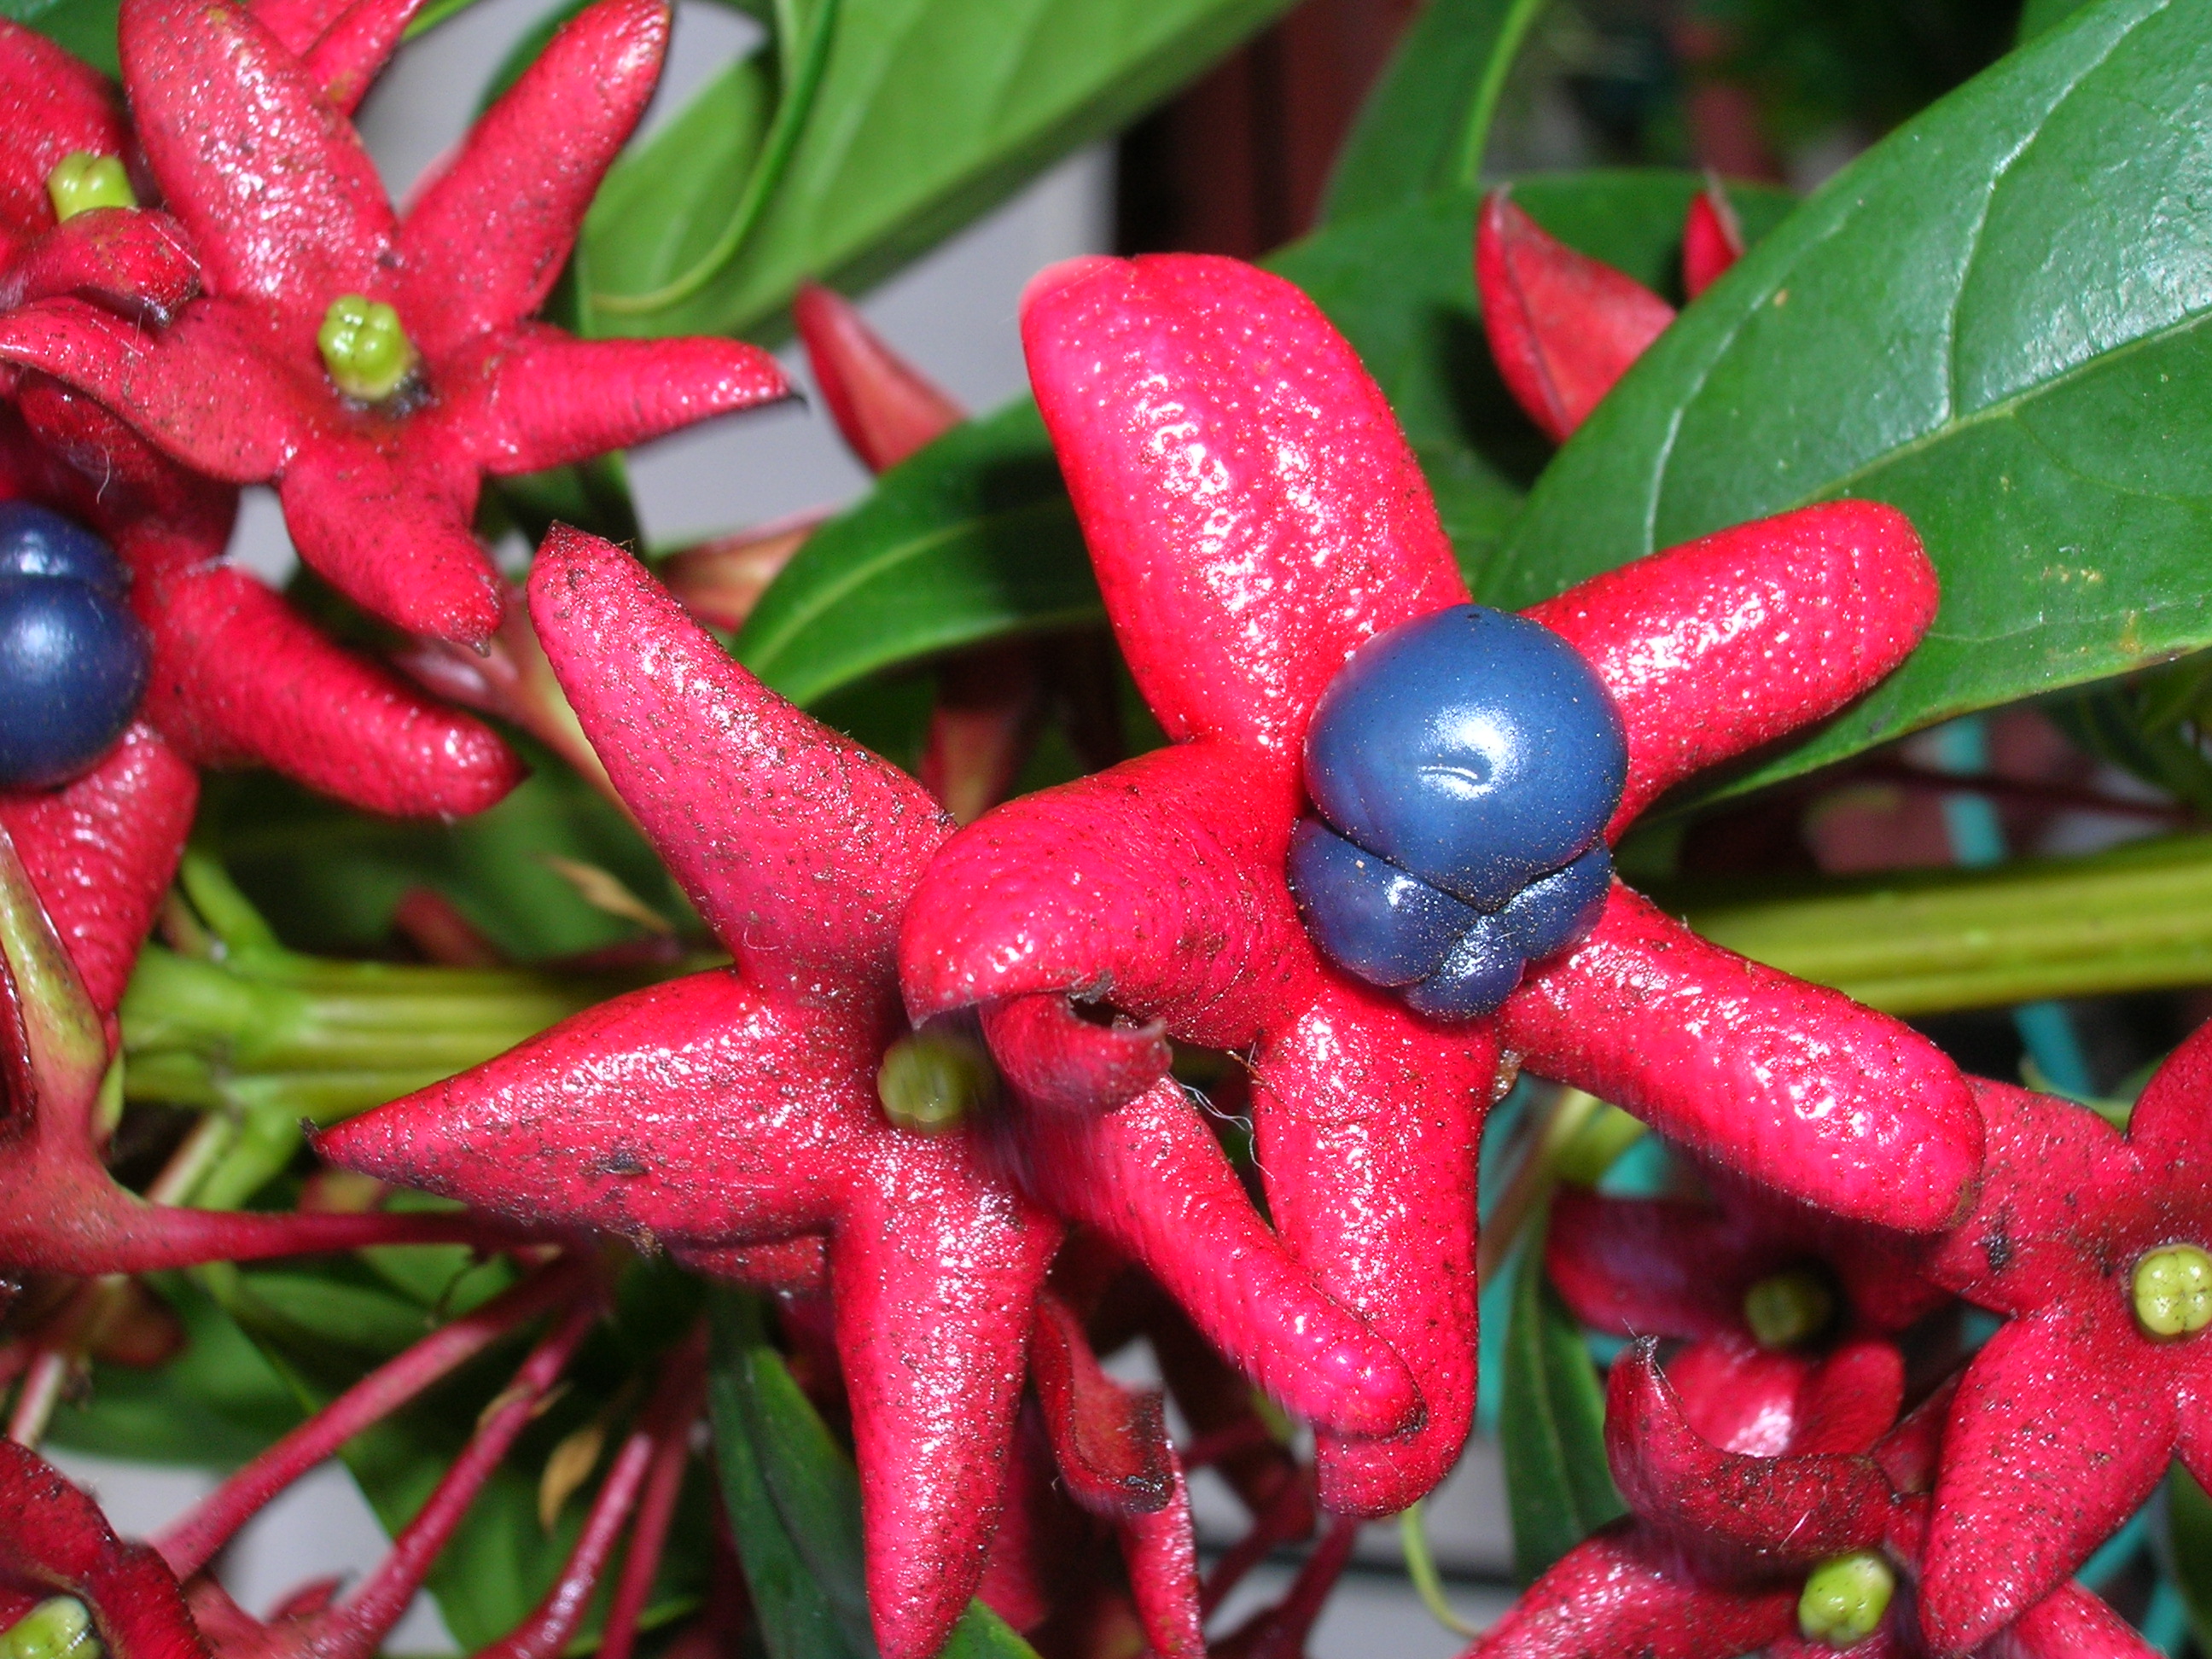 Close up of the black blue drupes surrounded by the red calyx.